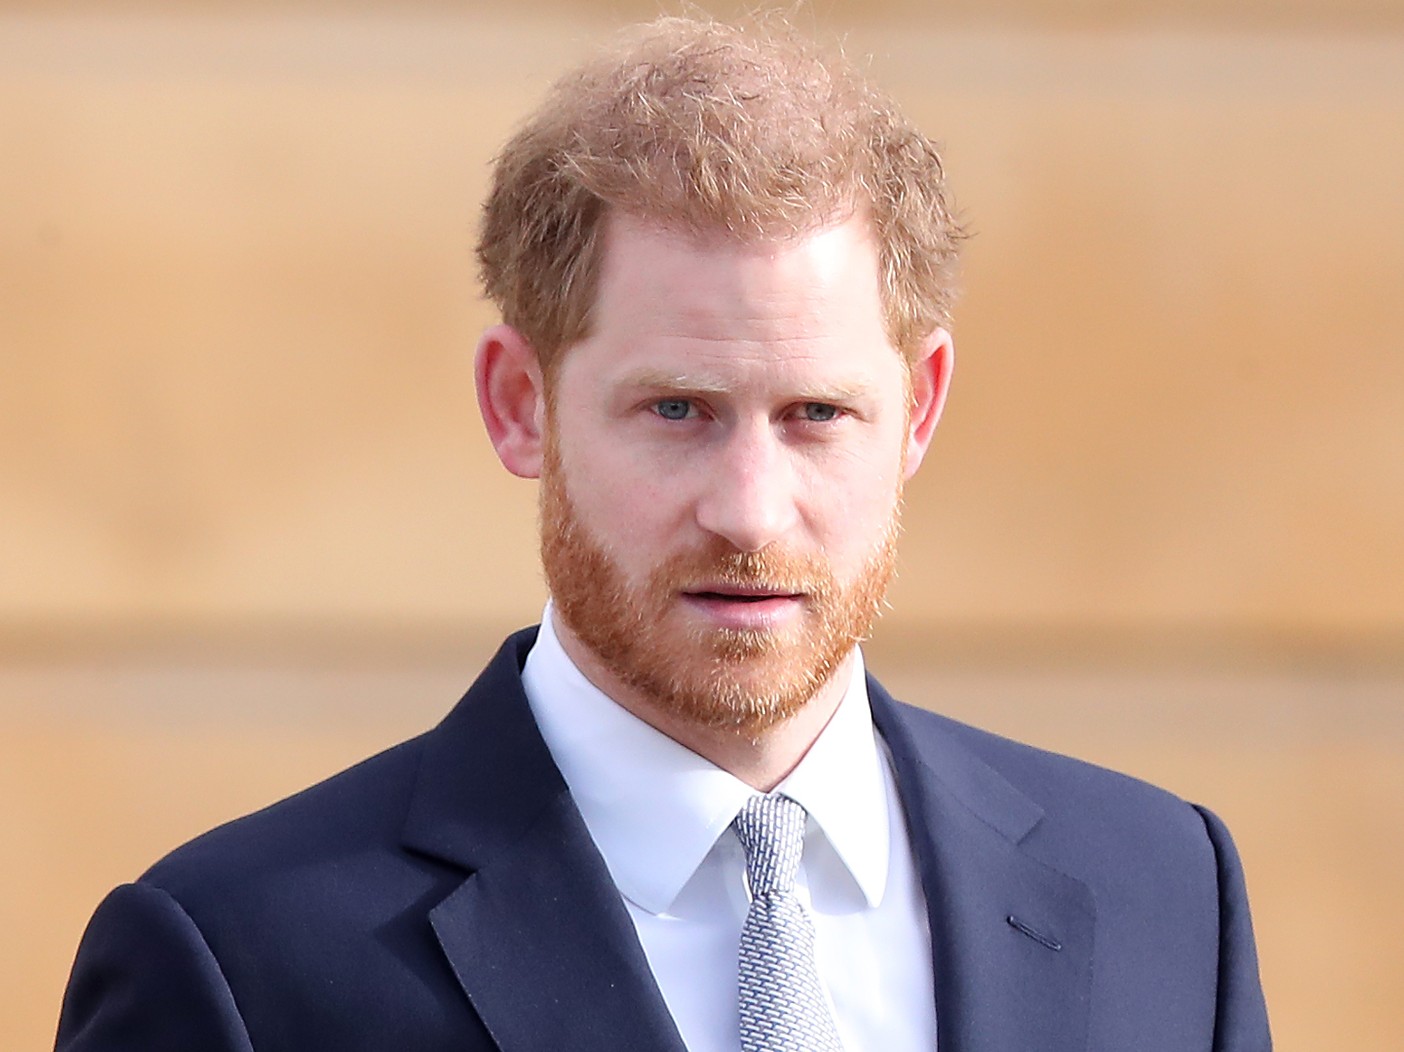 ‘Homesick’ Prince Harry Admits To ‘Feeling Out Of Place’ In California, Sketchy Rumor Claims